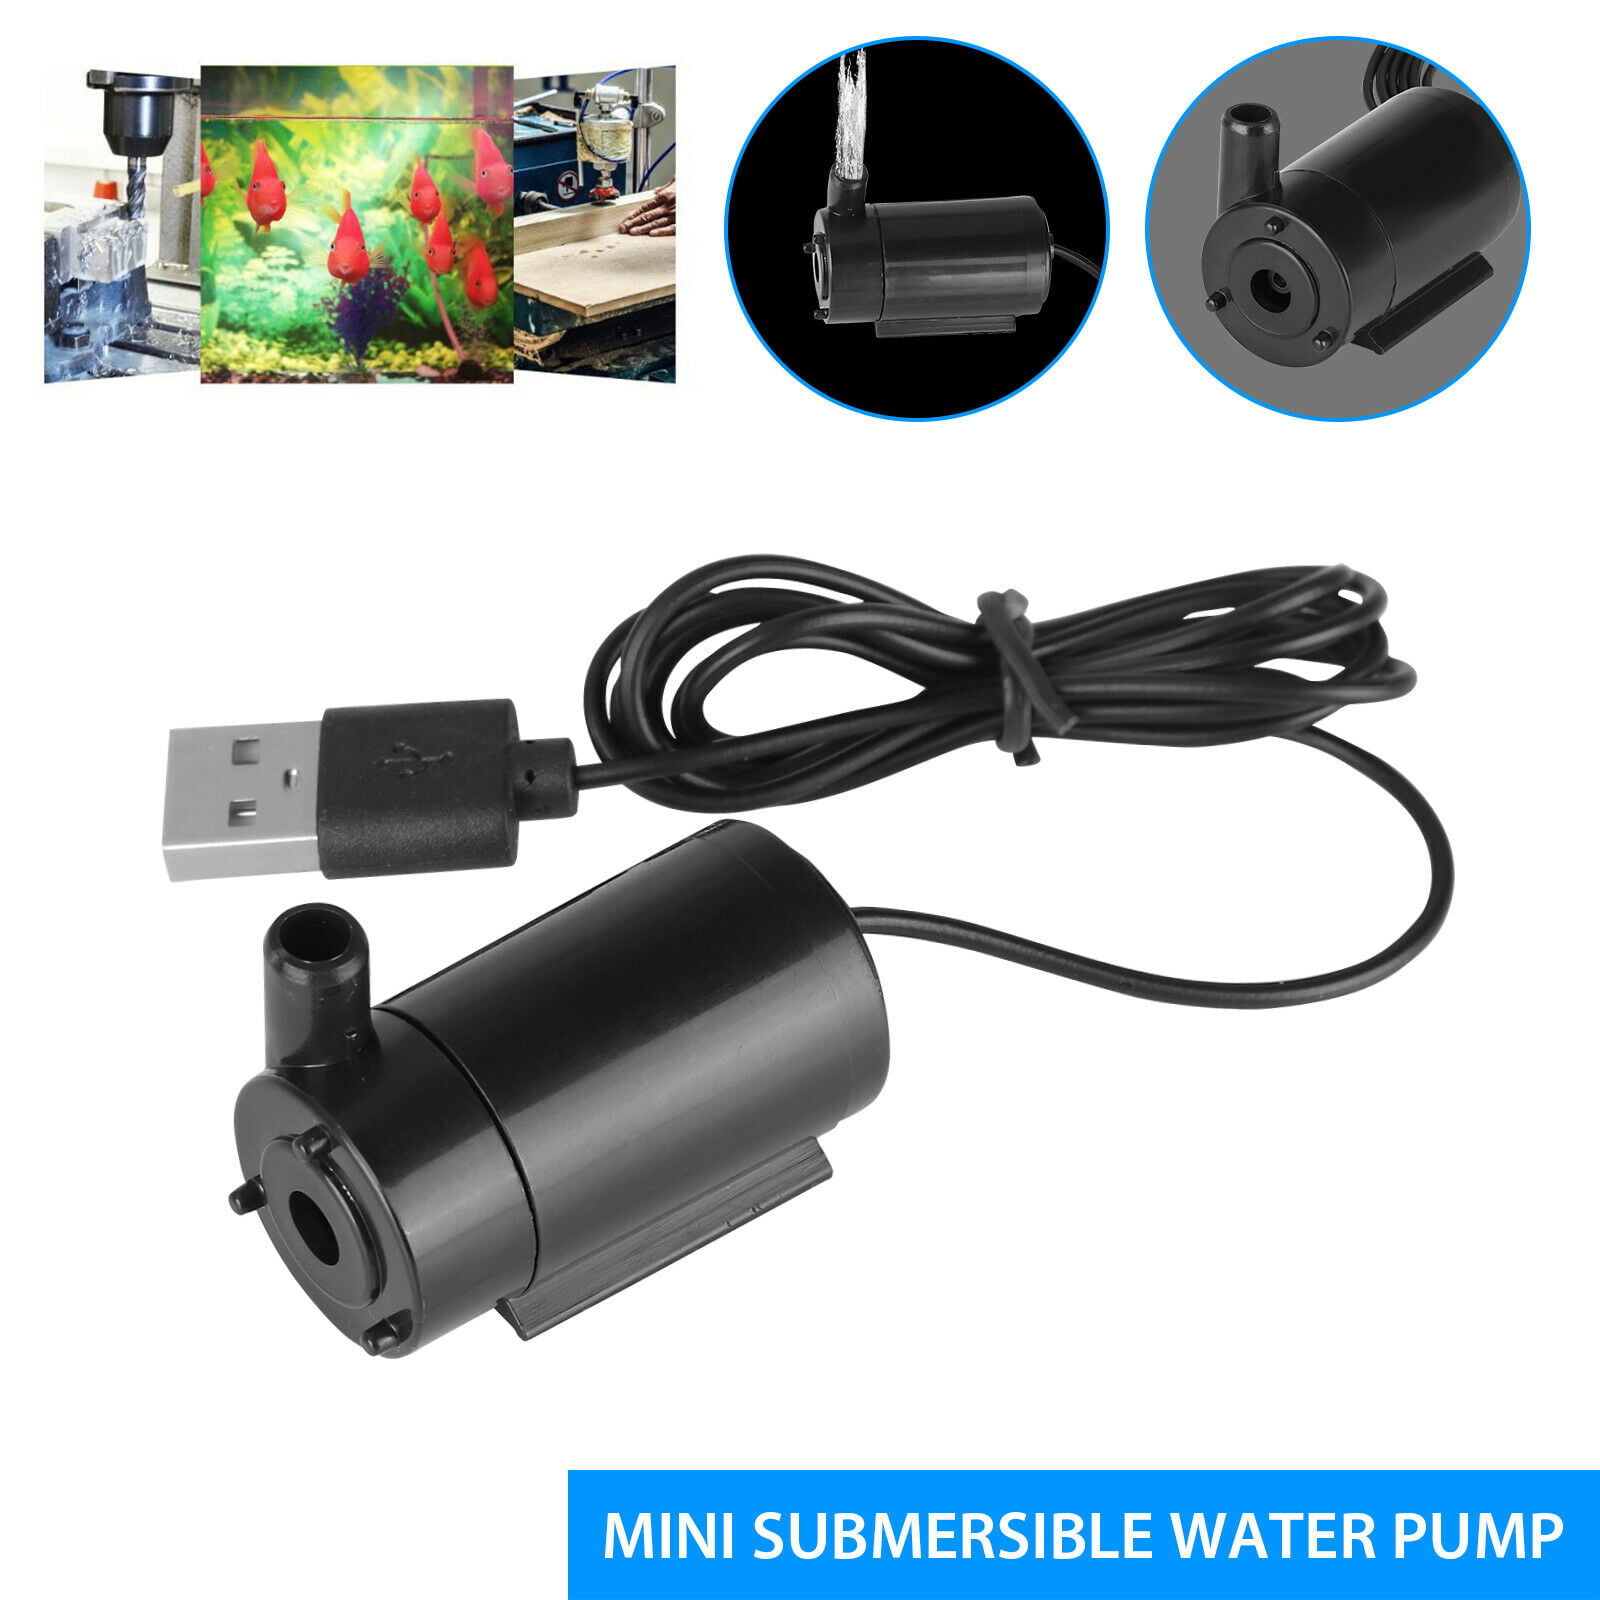 USB Plug 1m Cable Mute Small Water Pump Mini Submersible Pump 5V 1.0A Tools US 